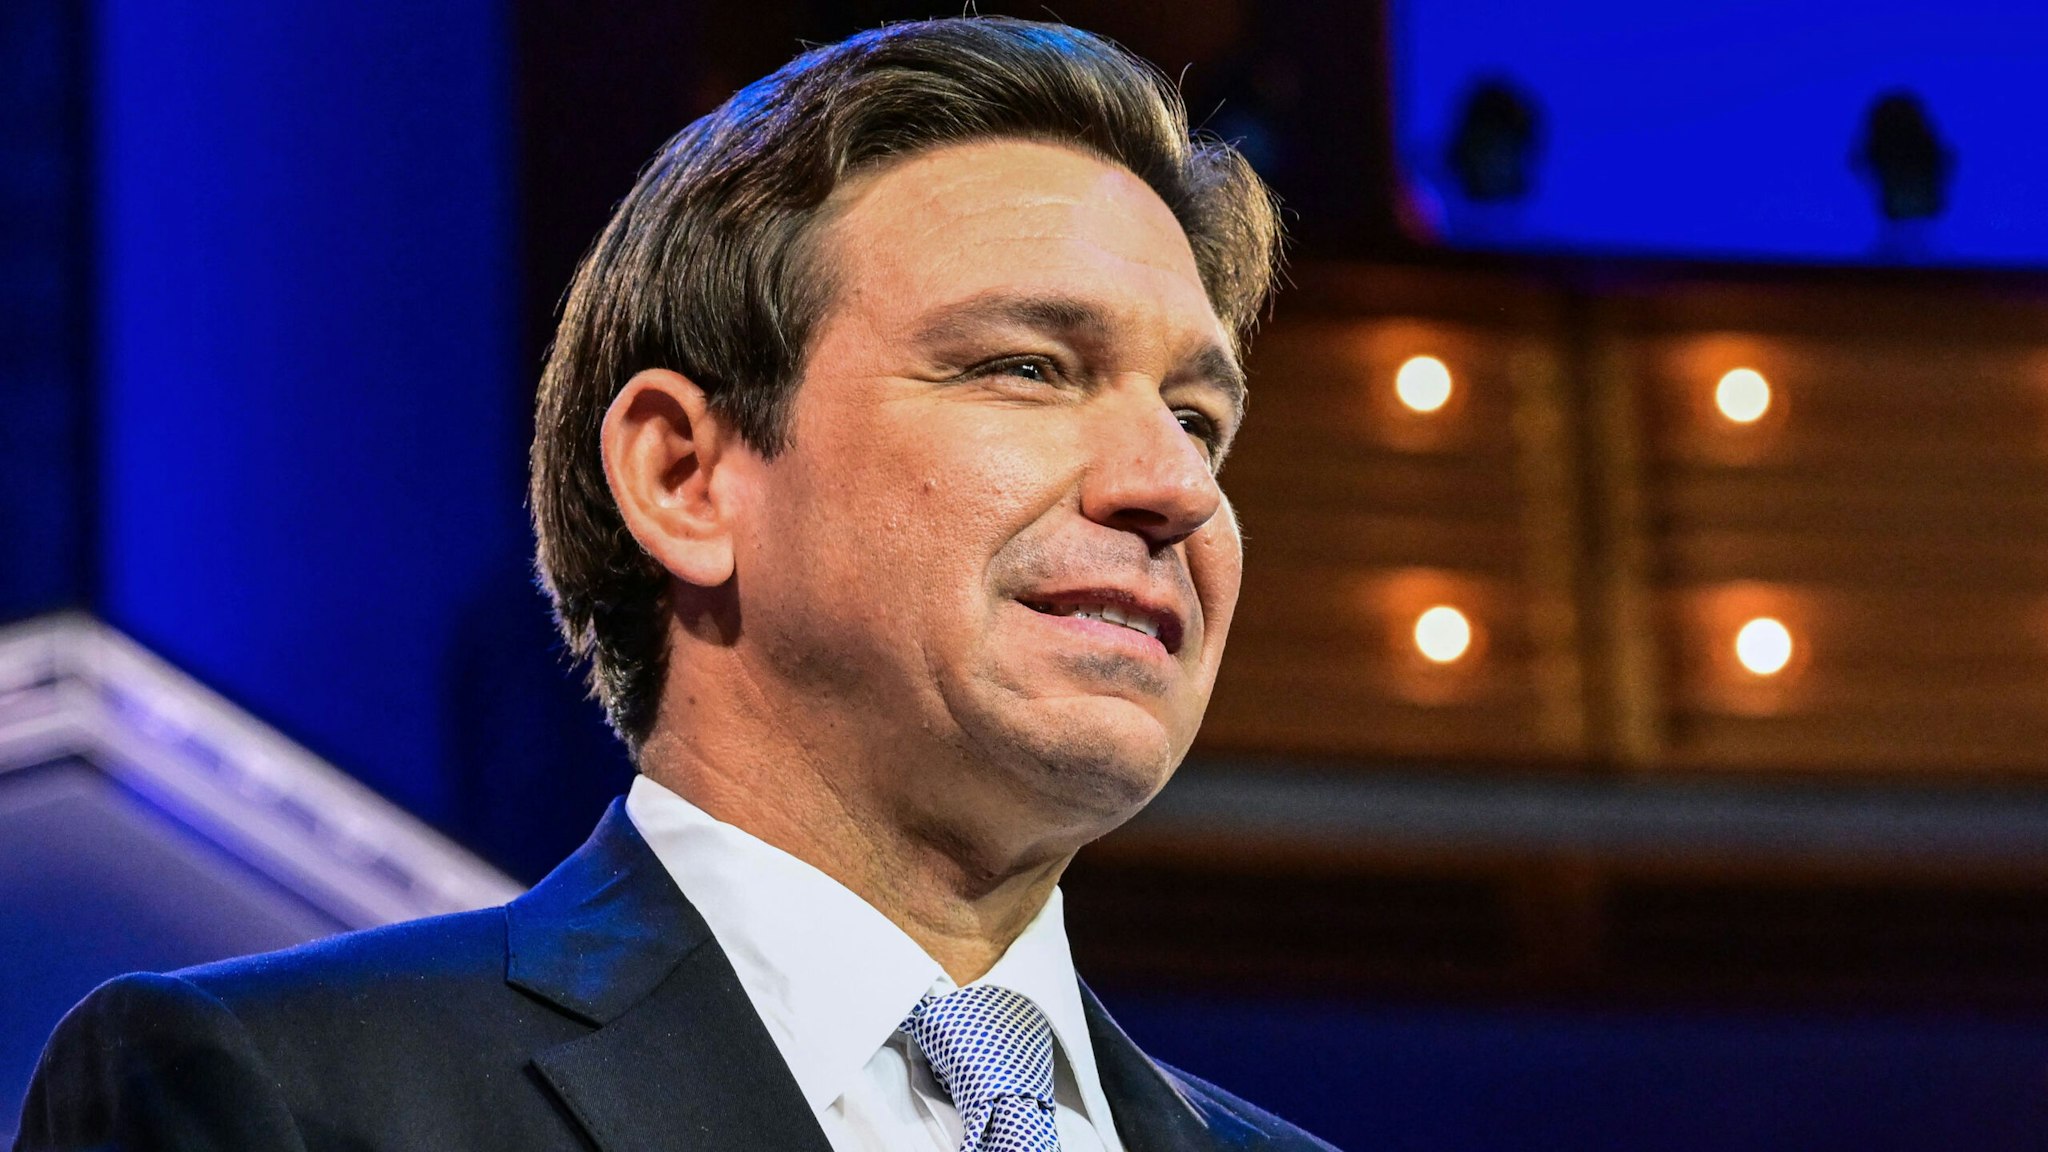 Florida Governor Ron DeSantis arrives for the third Republican presidential primary debate at the Knight Concert Hall at the Adrienne Arsht Center for the Performing Arts in Miami, Florida, on November 8, 2023.